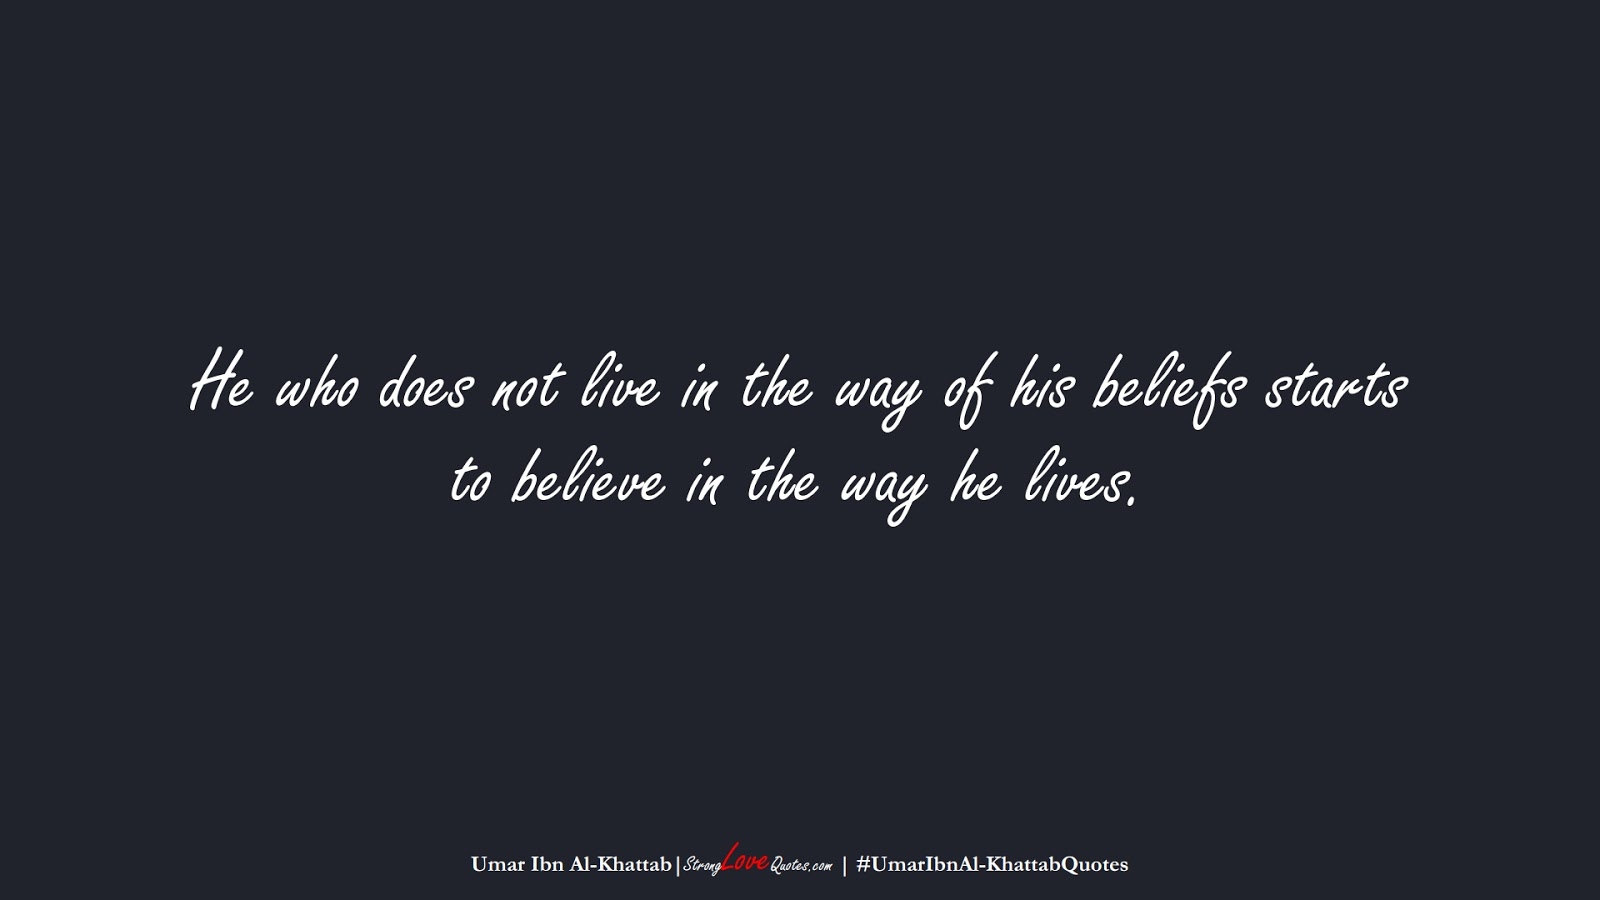 He who does not live in the way of his beliefs starts to believe in the way he lives. (Umar Ibn Al-Khattab);  #UmarIbnAl-KhattabQuotes